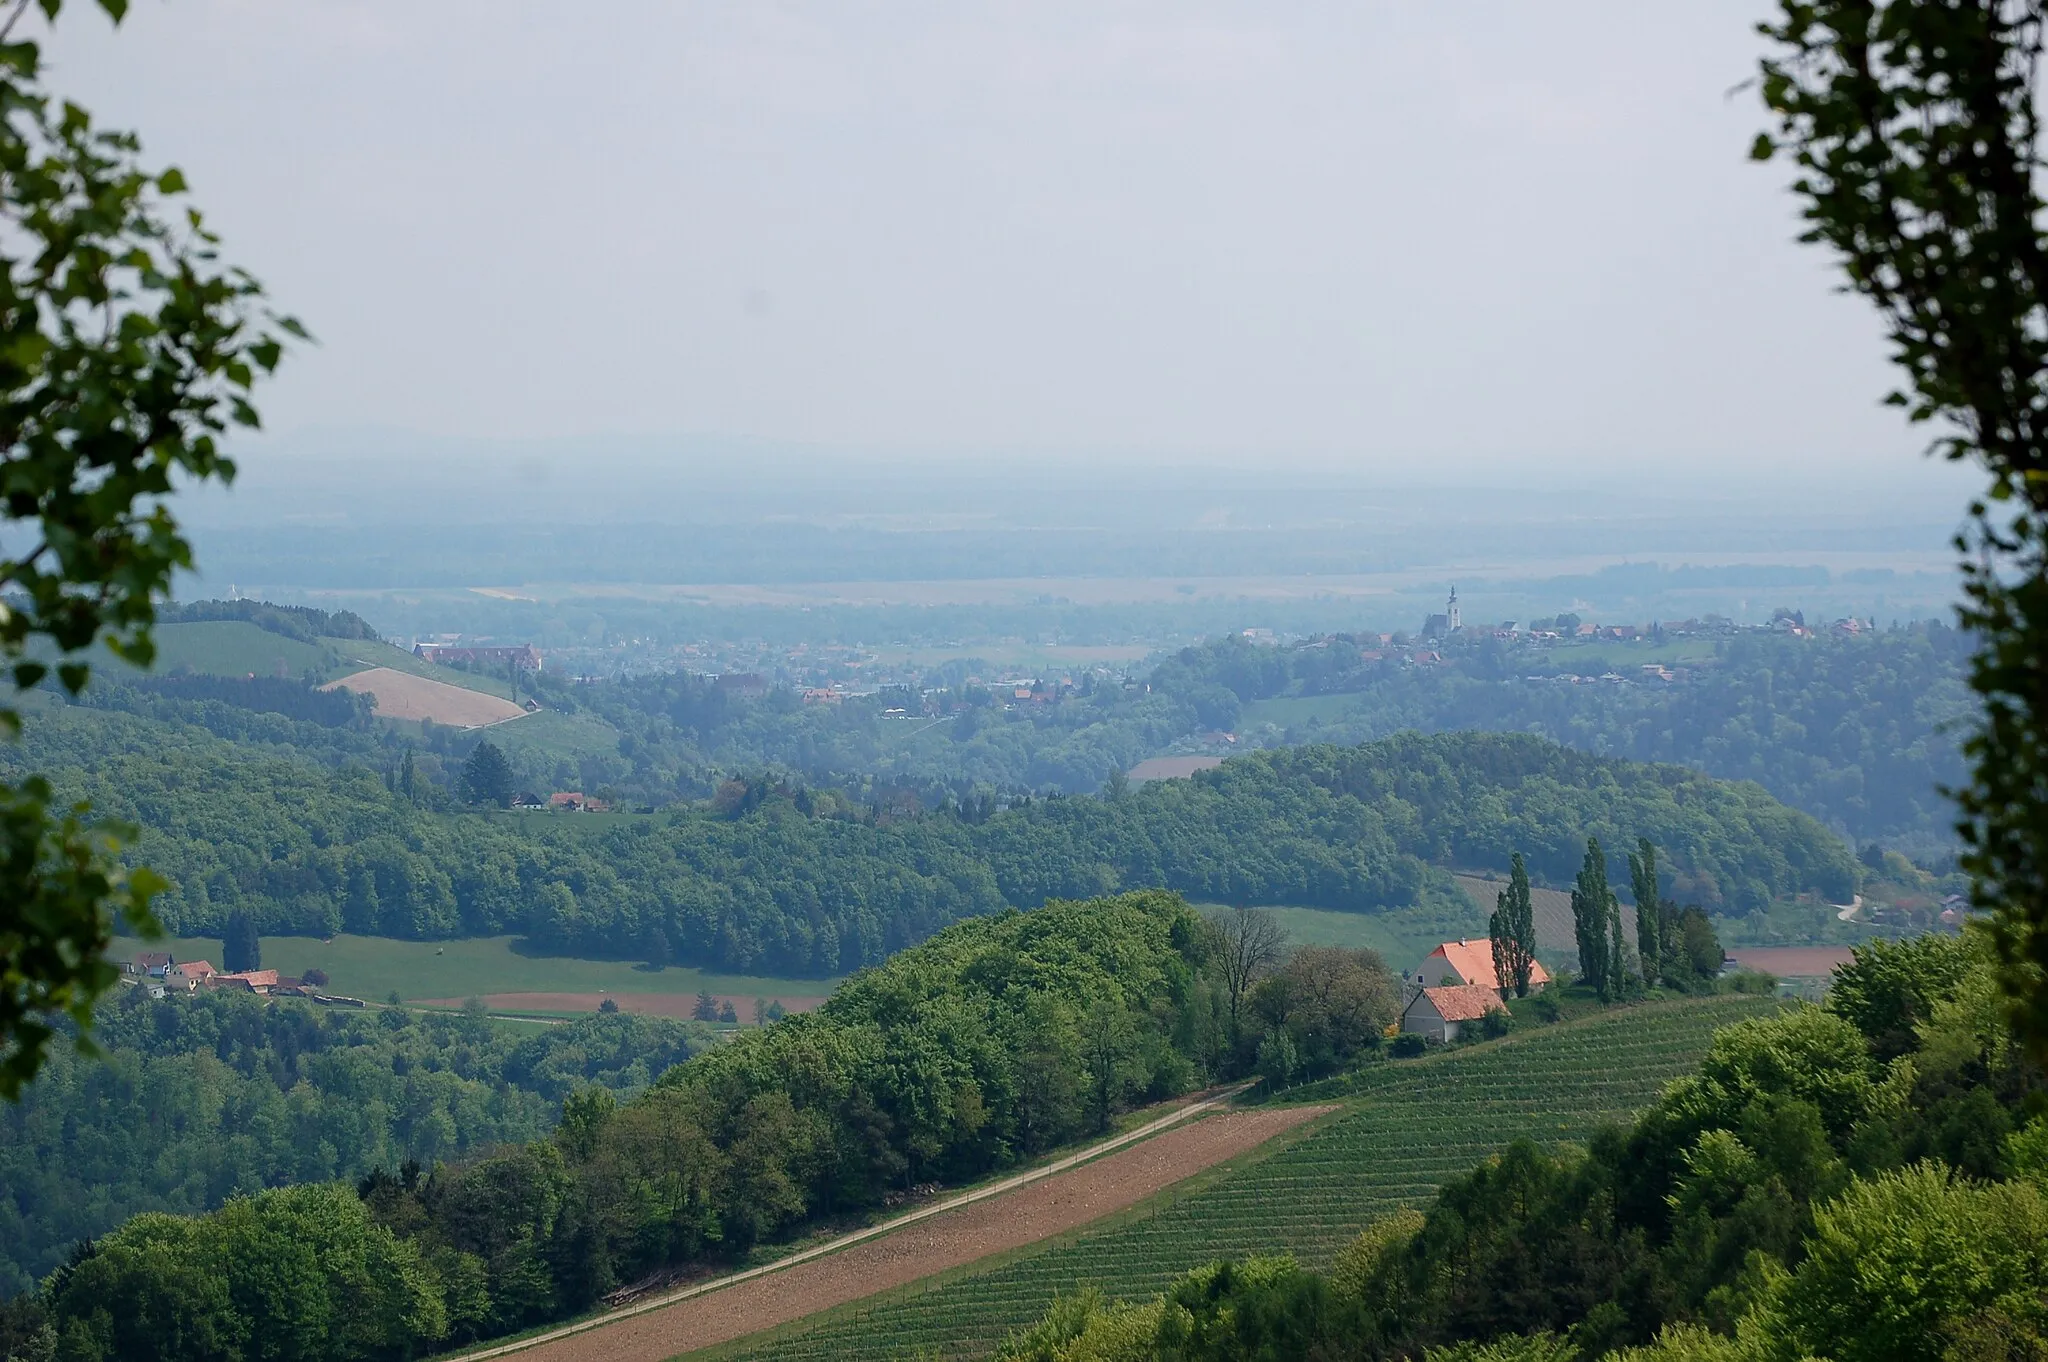 Photo showing: View across Sausal hills and Mur valley from Kitzeck im Sausal, Styria. In the middle area the spire of Frauenberg bei Leibnitz pilgrimage church and parts of Seggau castle can be seen.